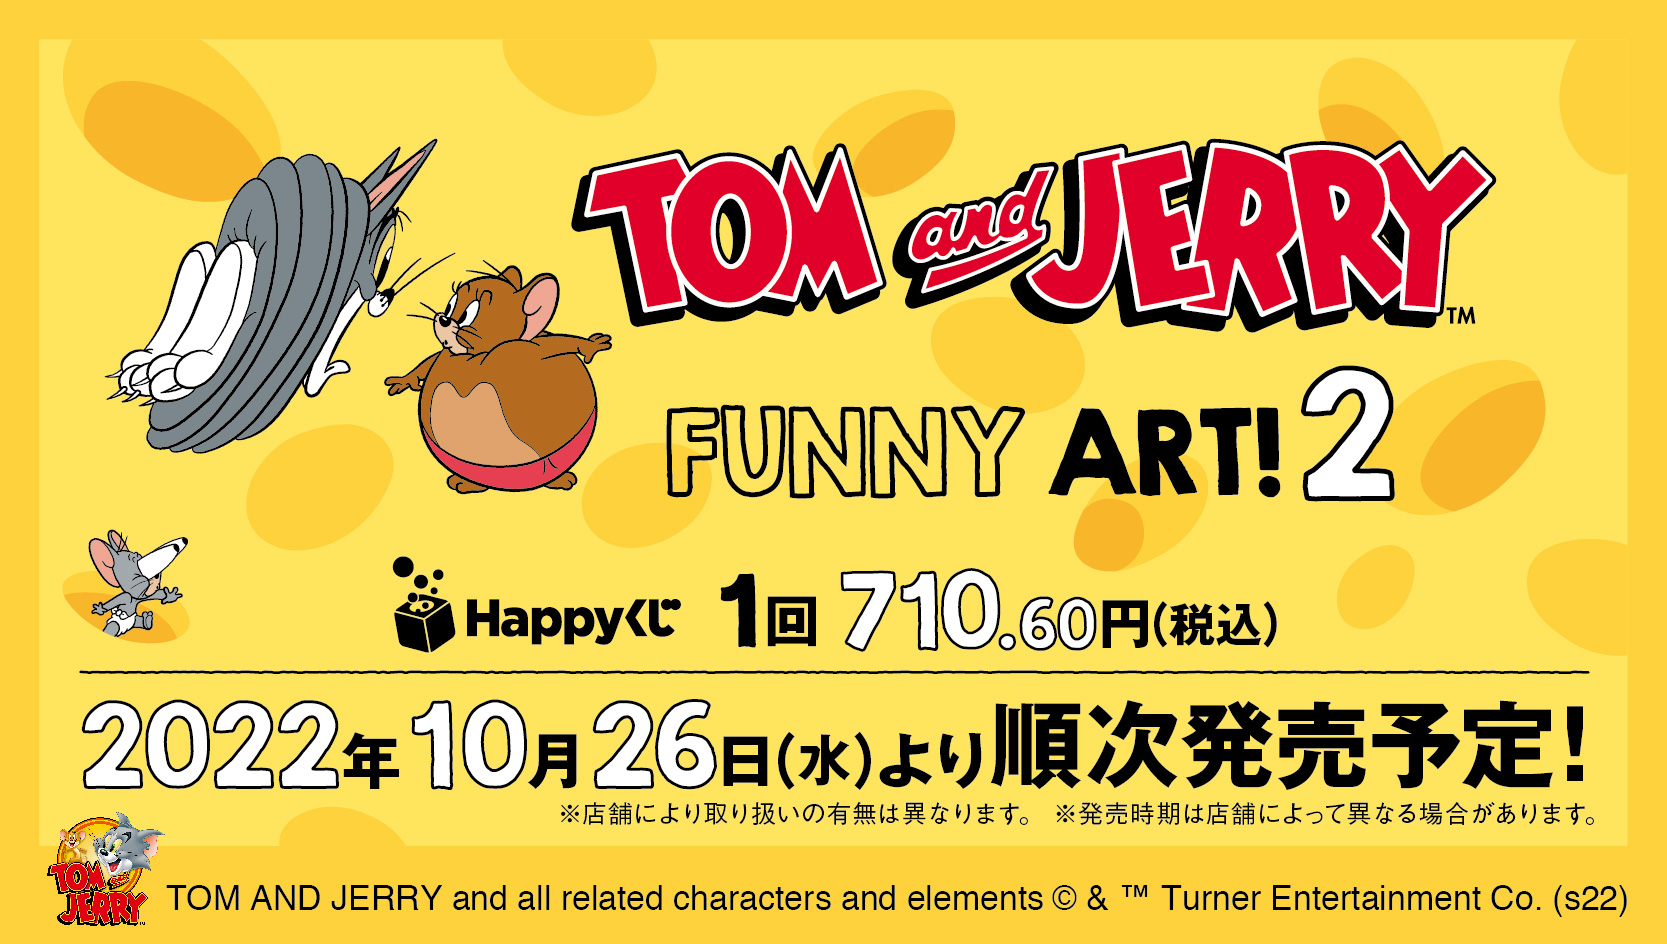 TOM and JERRY FUNNY ART!』2│商品一覧│Happyくじ